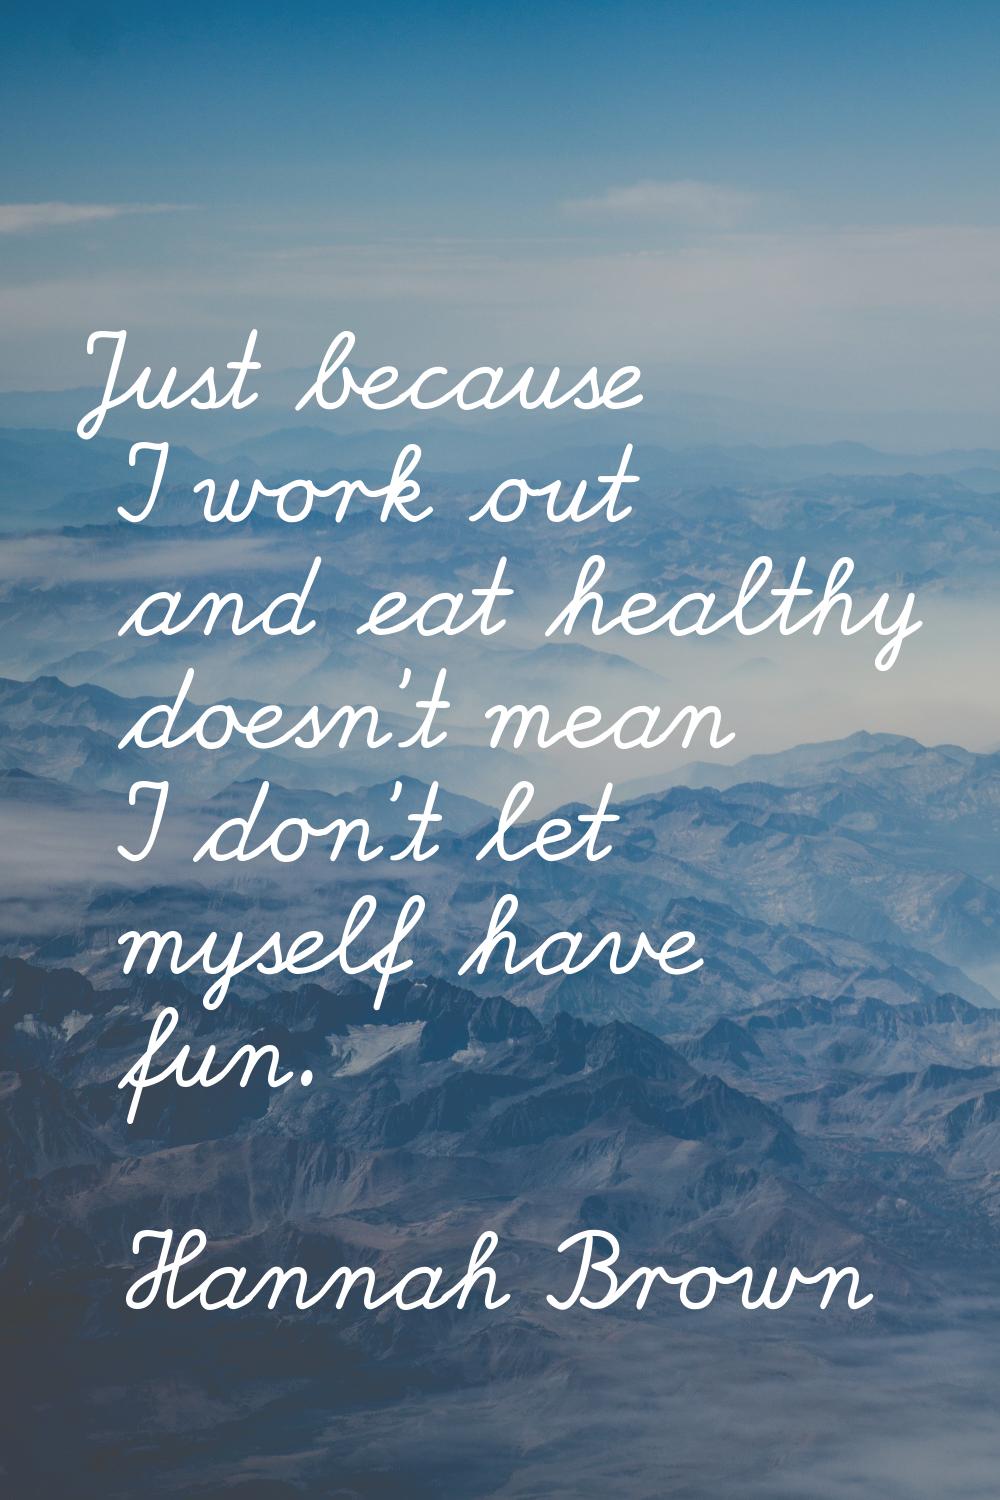 Just because I work out and eat healthy doesn't mean I don't let myself have fun.